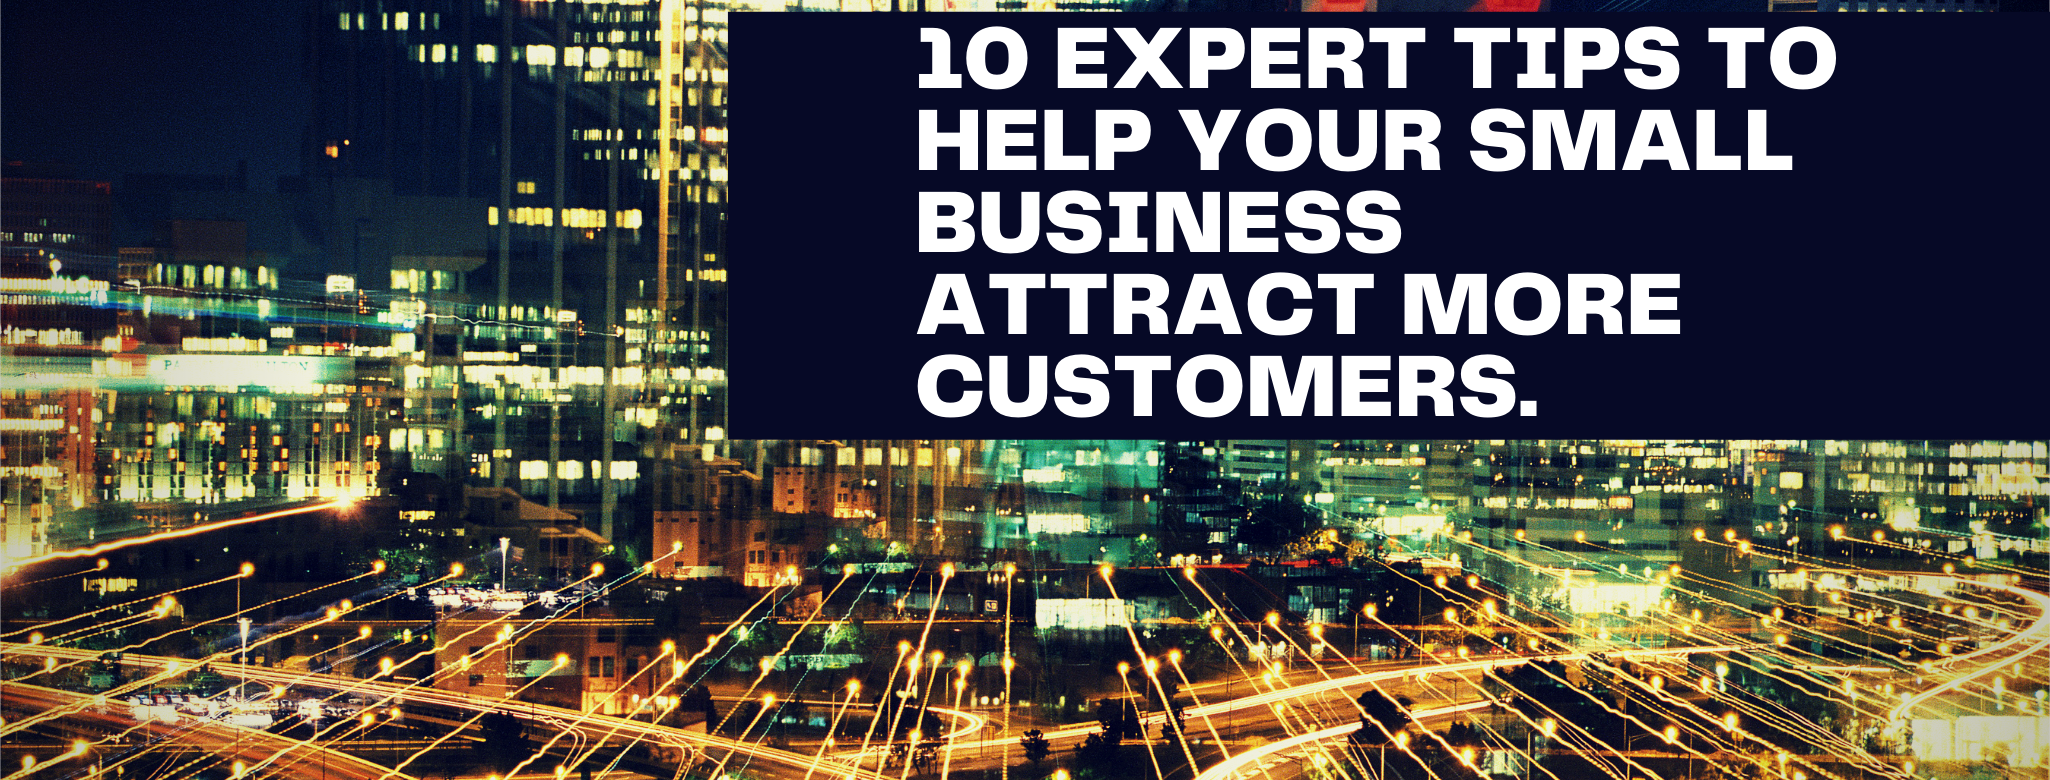 10 expert tips to help your small business attract more customers.